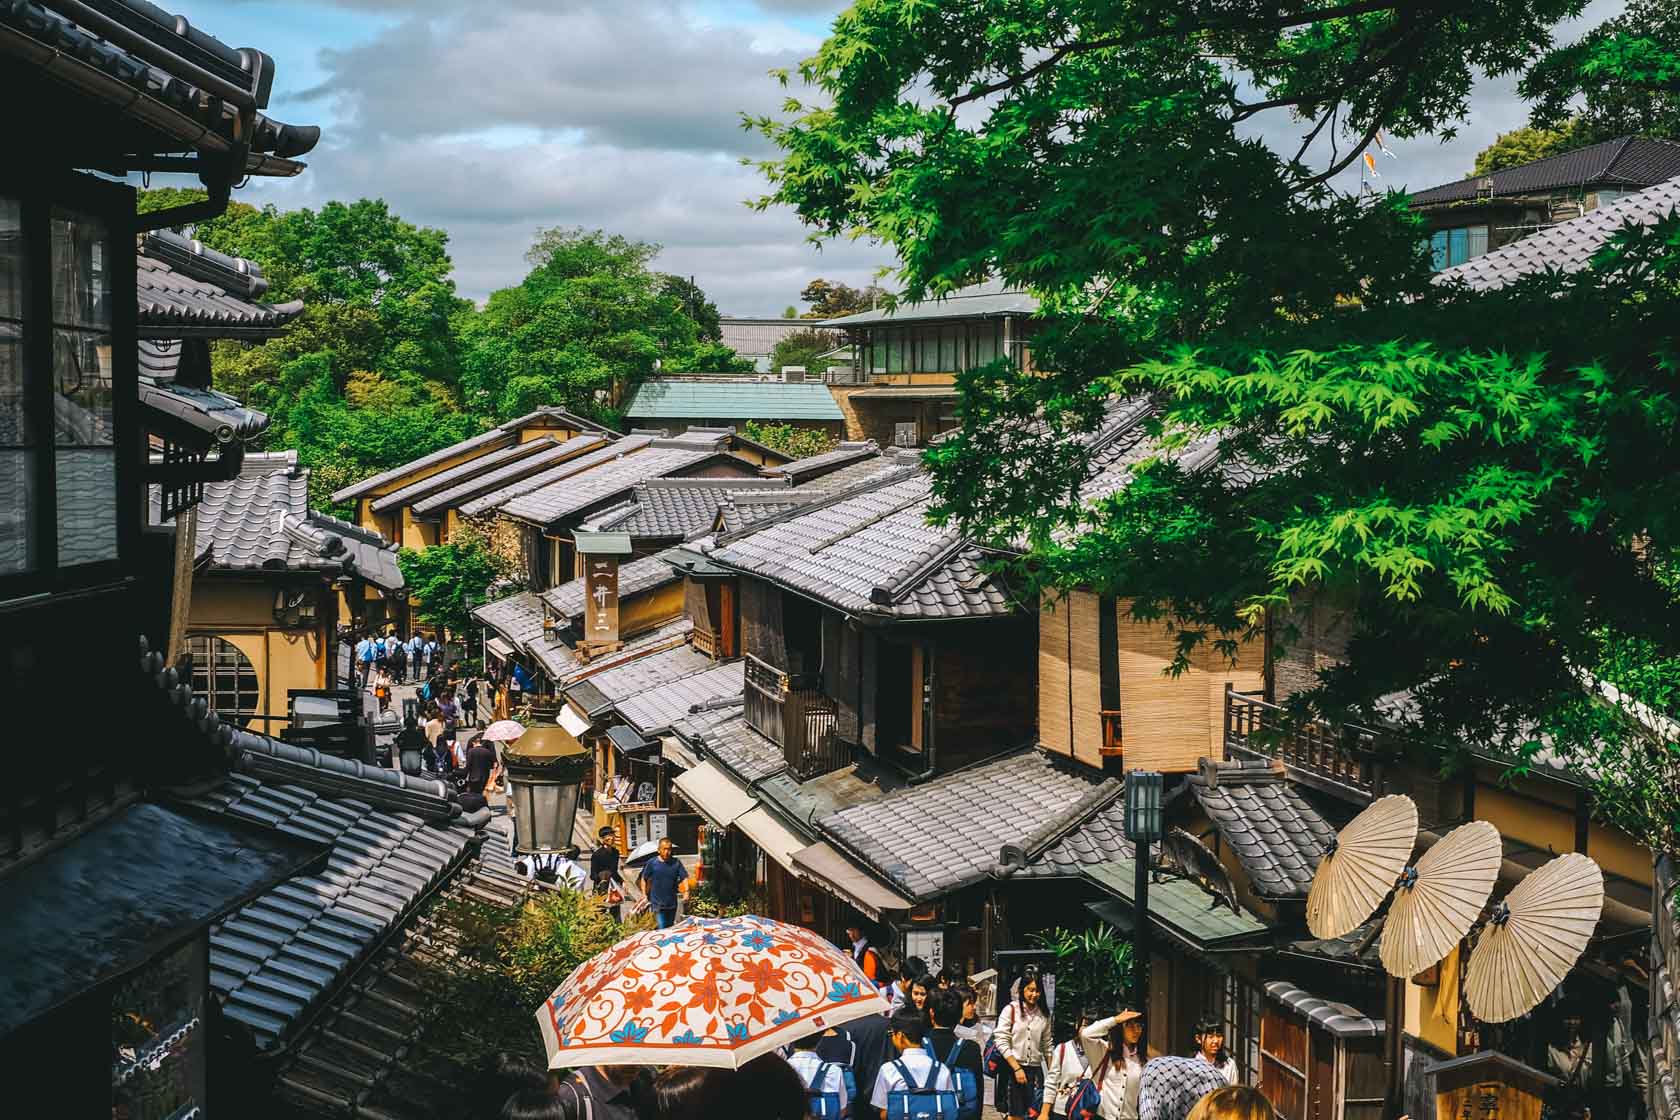 Itinerary for Kyoto, Japan